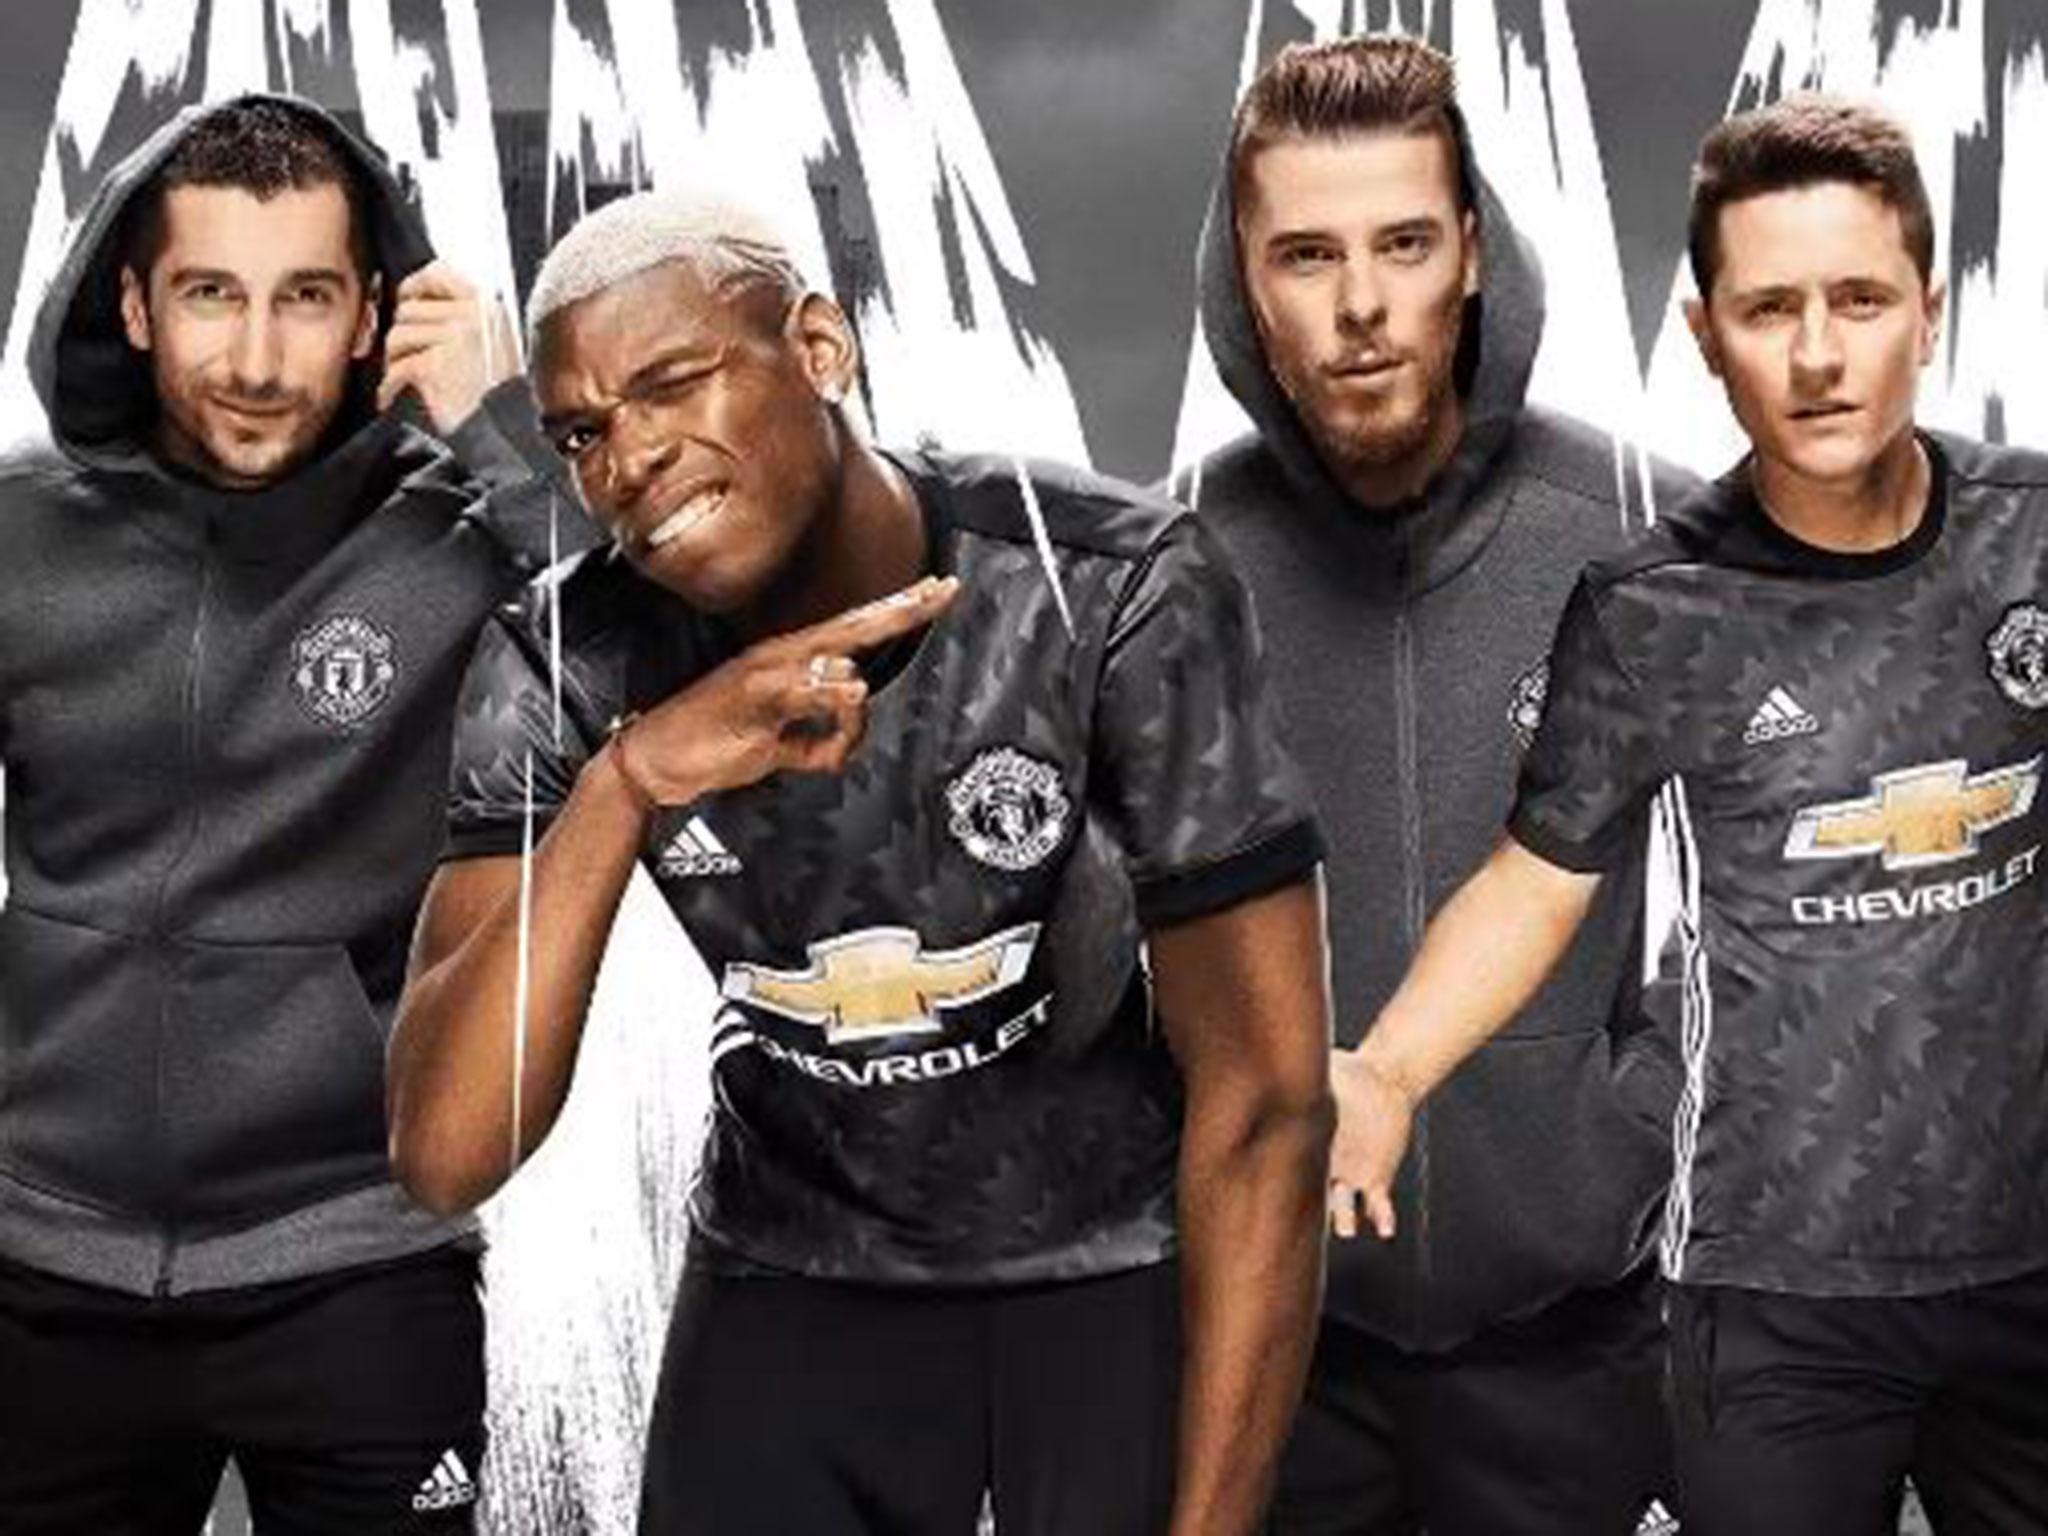 Manchester United have a new kit ahead of the 2017/18 season